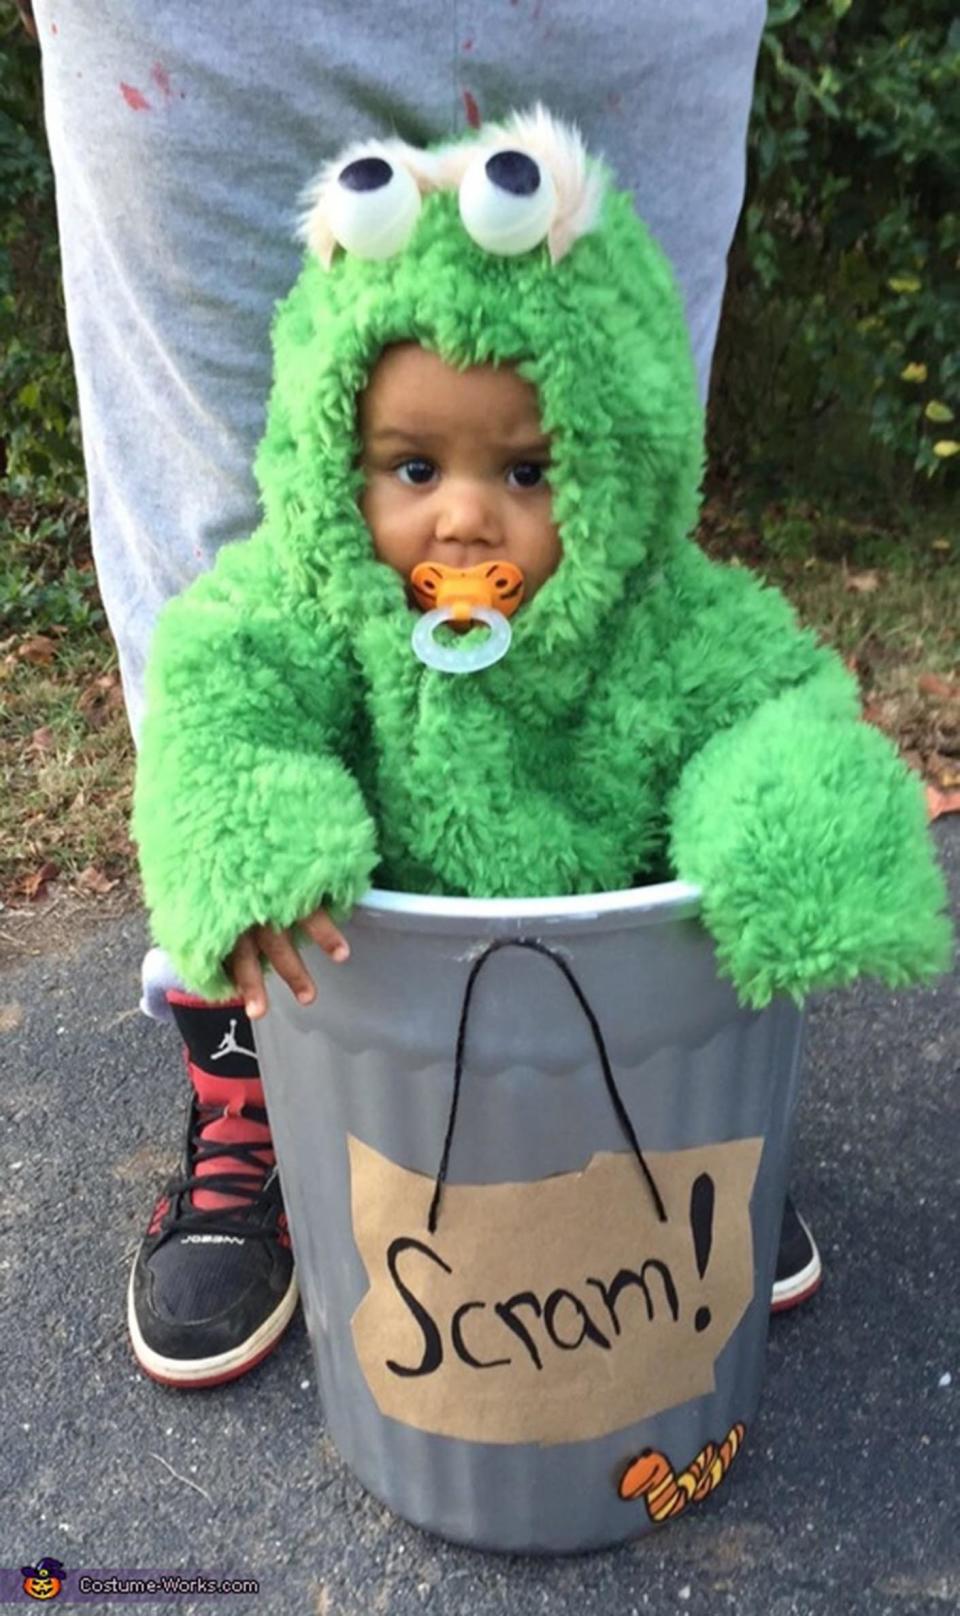 Via <a href="http://www.costume-works.com/costumes_for_babies/oscar-the-grouch1.html" target="_blank">Costume Works</a>